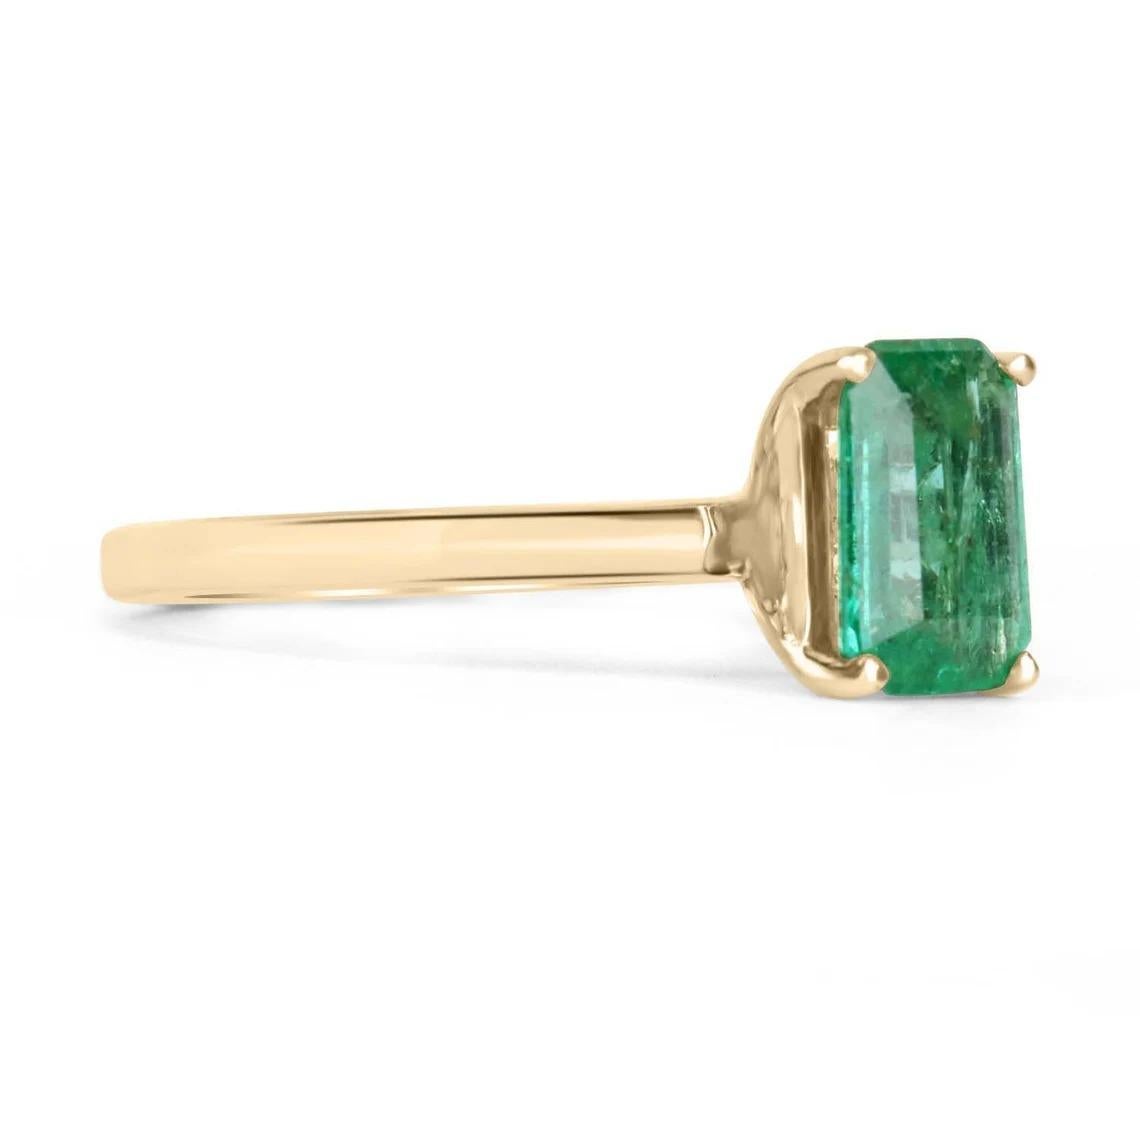 Displayed is a classic emerald solitaire emerald-cut engagement ring/right-hand ring in 14K yellow gold. This gorgeous solitaire ring carries a full 1.05-carat emerald in a four-prong setting. Fully faceted, this gemstone showcases excellent shine.